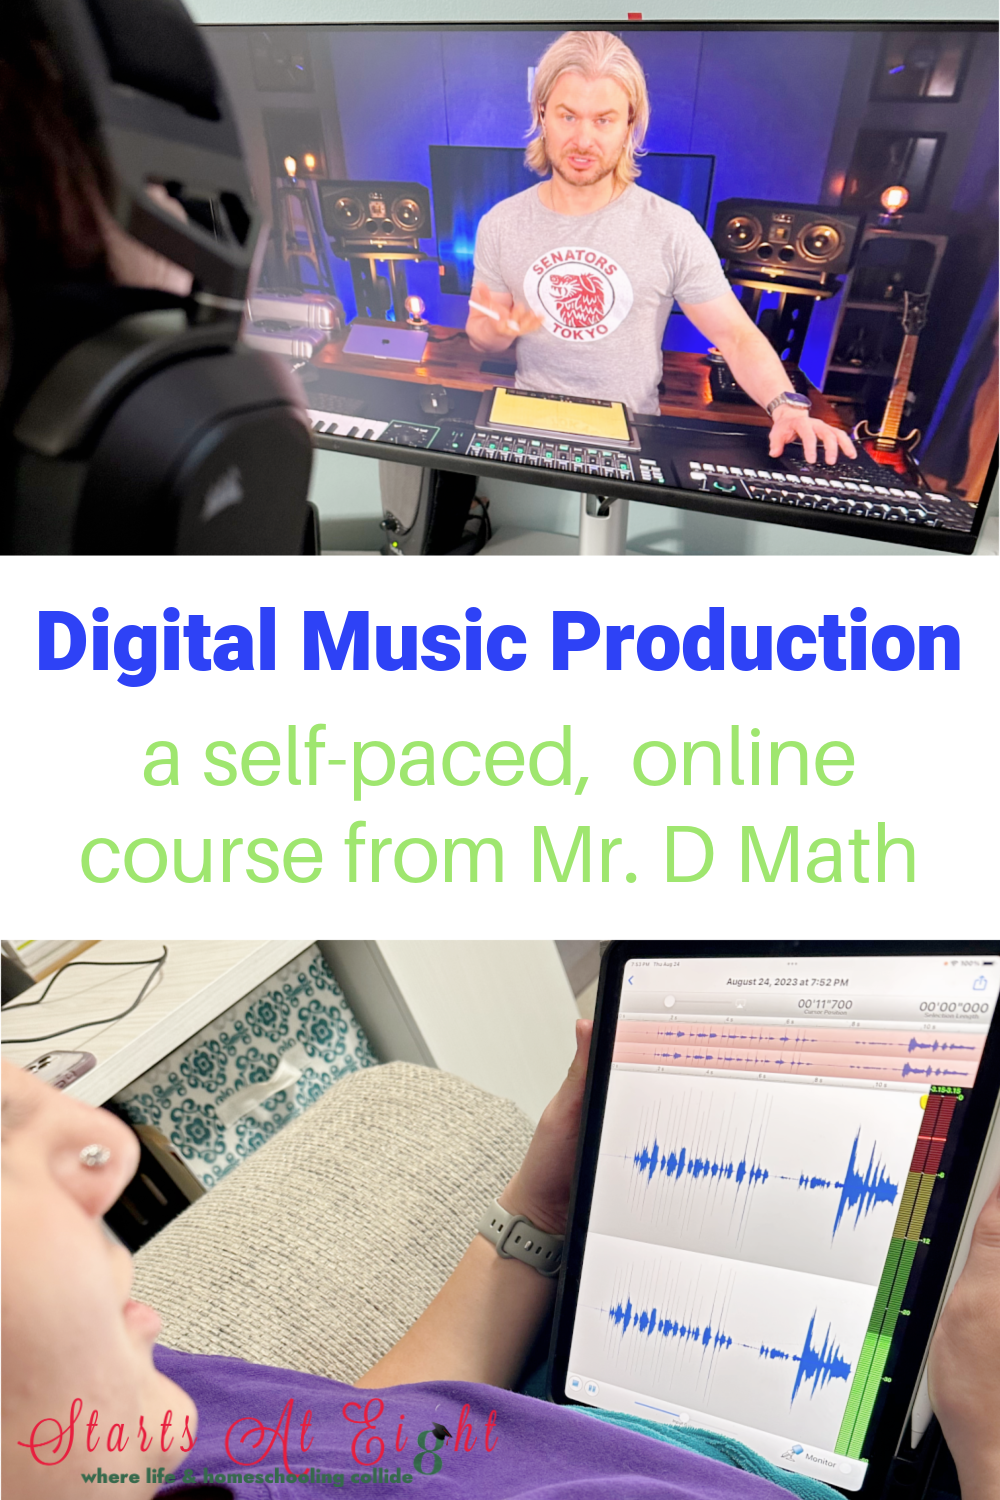 Mr. D Math Online Digital Music Production Class is a self-paced, half credit, modern music production course for 4th grade and up.